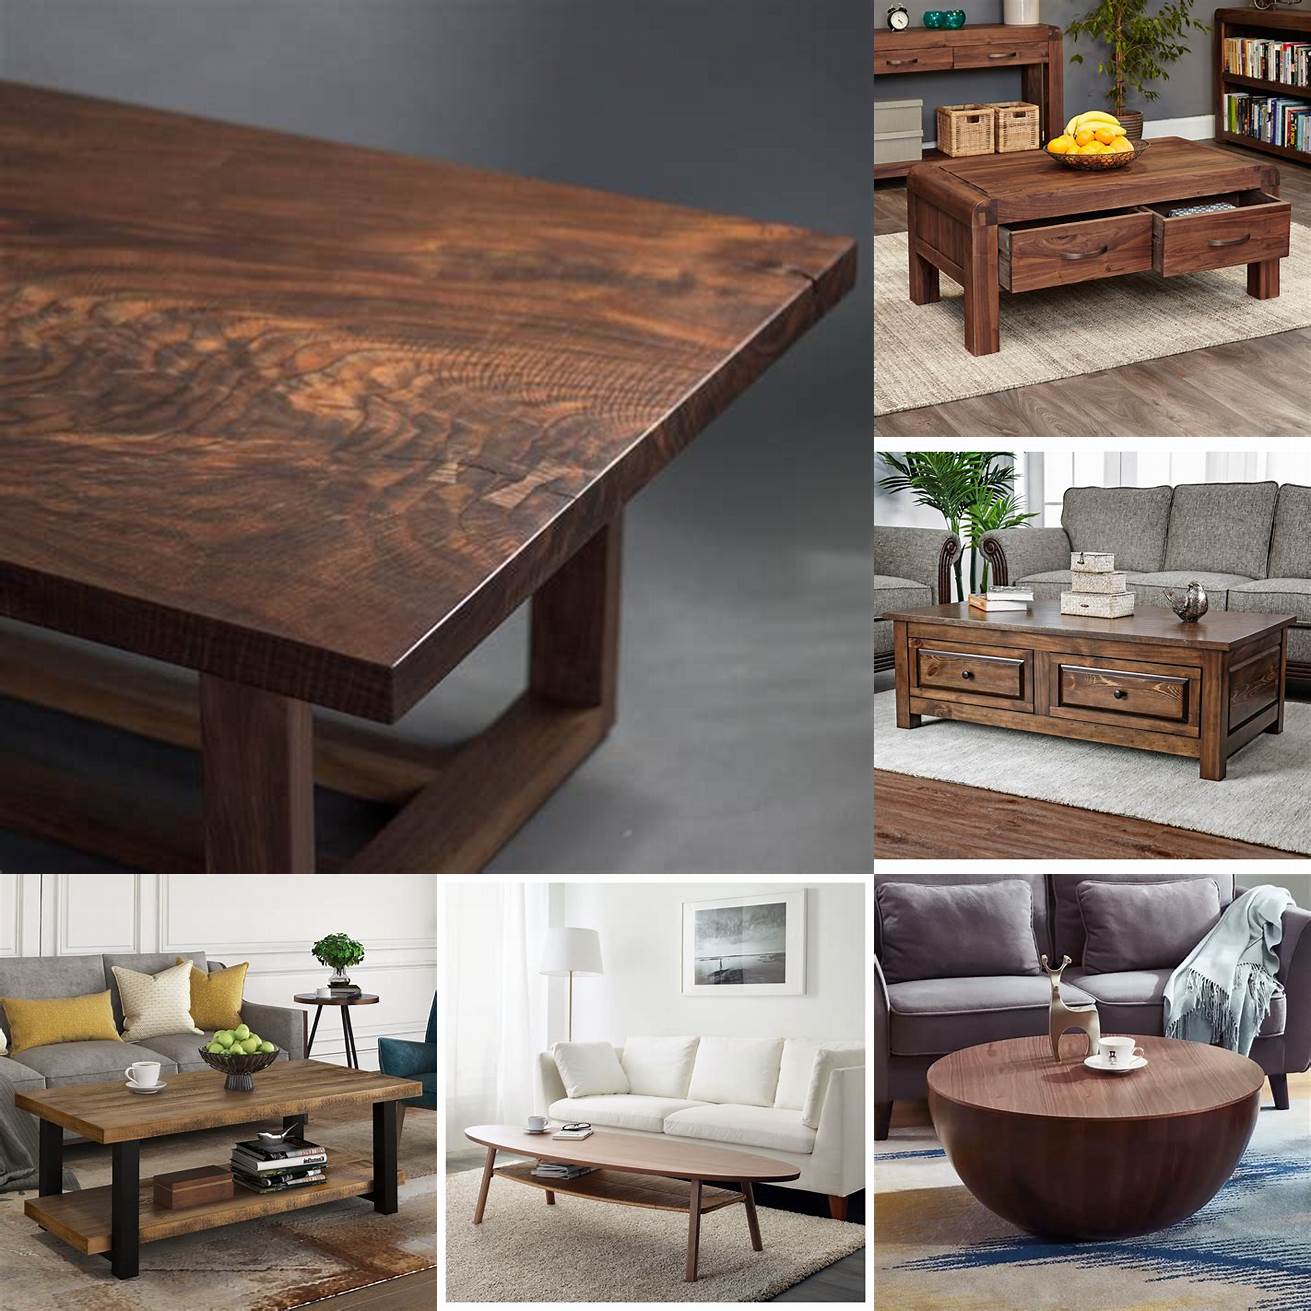 A walnut coffee table can add warmth and character to your living room